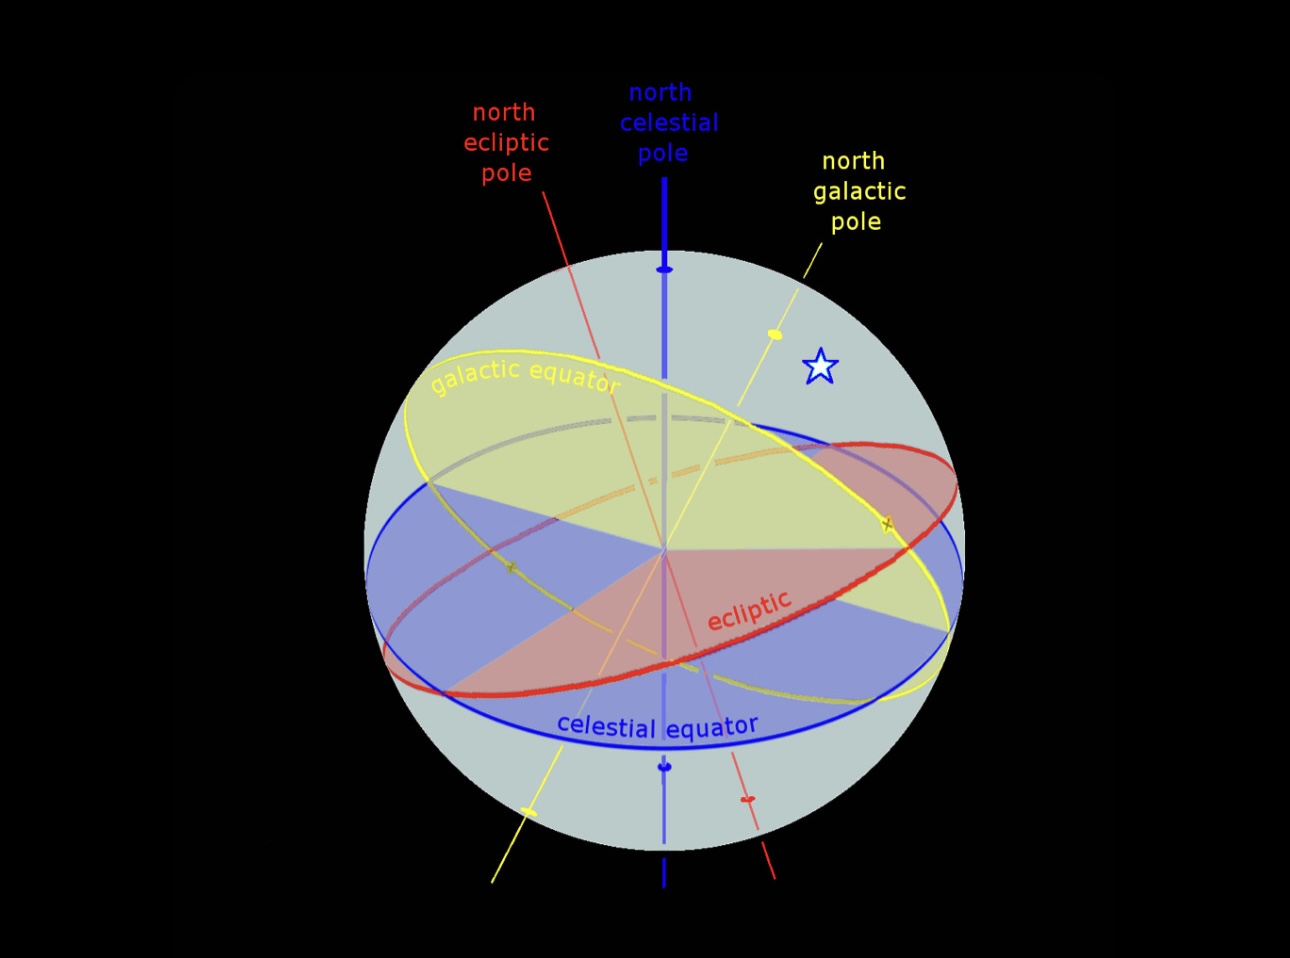 Diagram with the north celestial pole, north ecliptic pole, north galactic pole marked in different colors